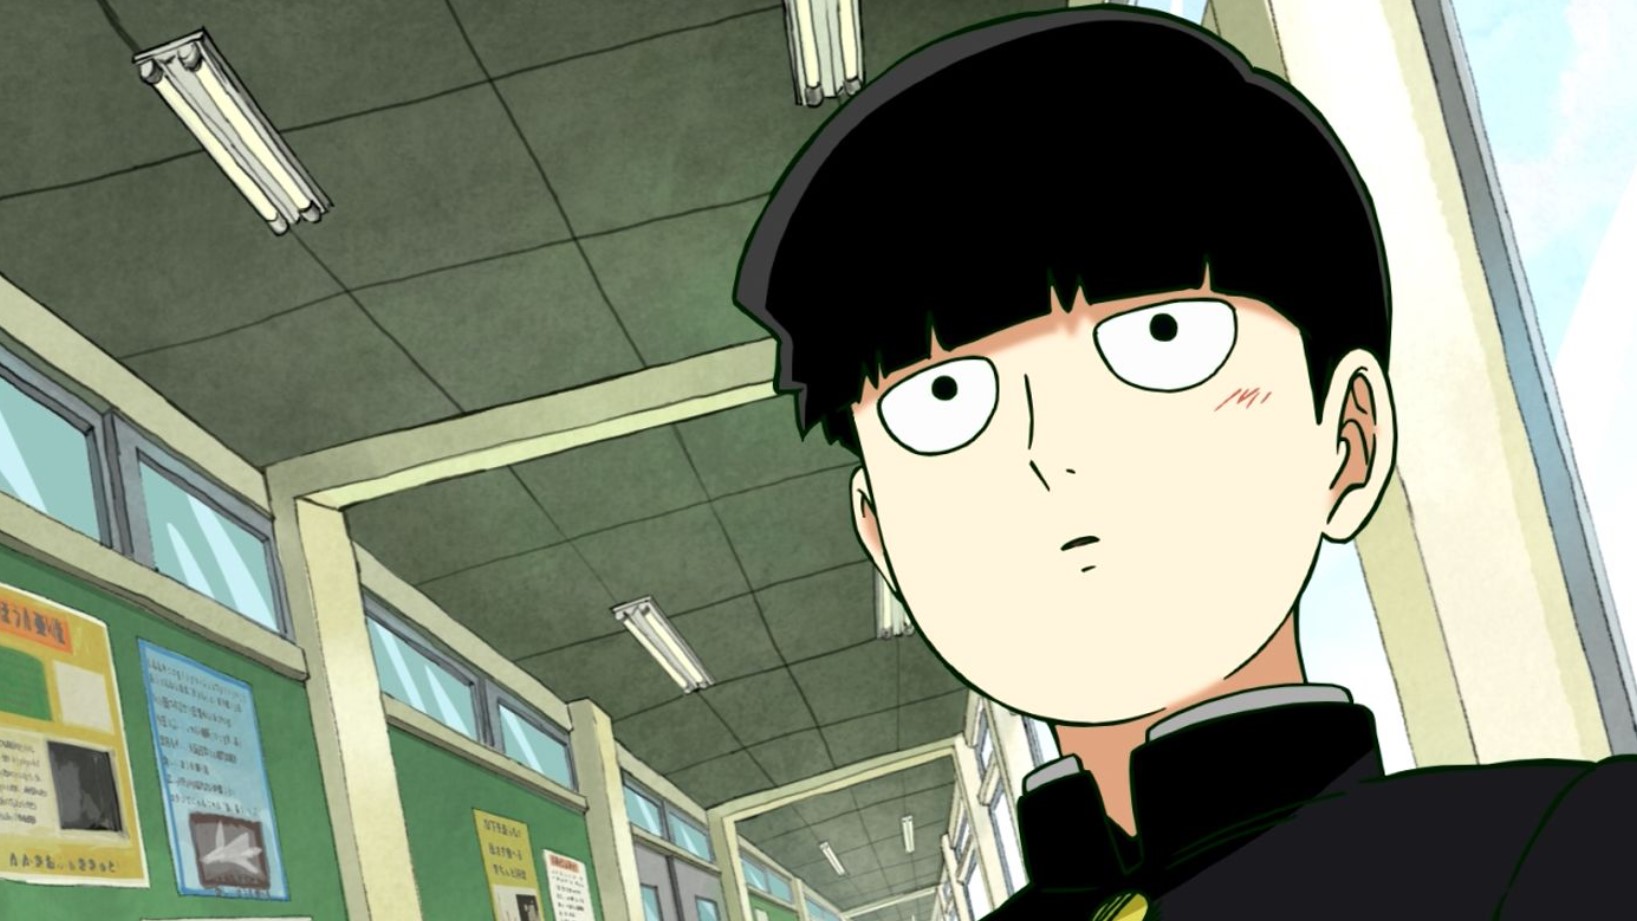 Mob Psycho 100 Season 3 Episode 4 review: A divine tree for a